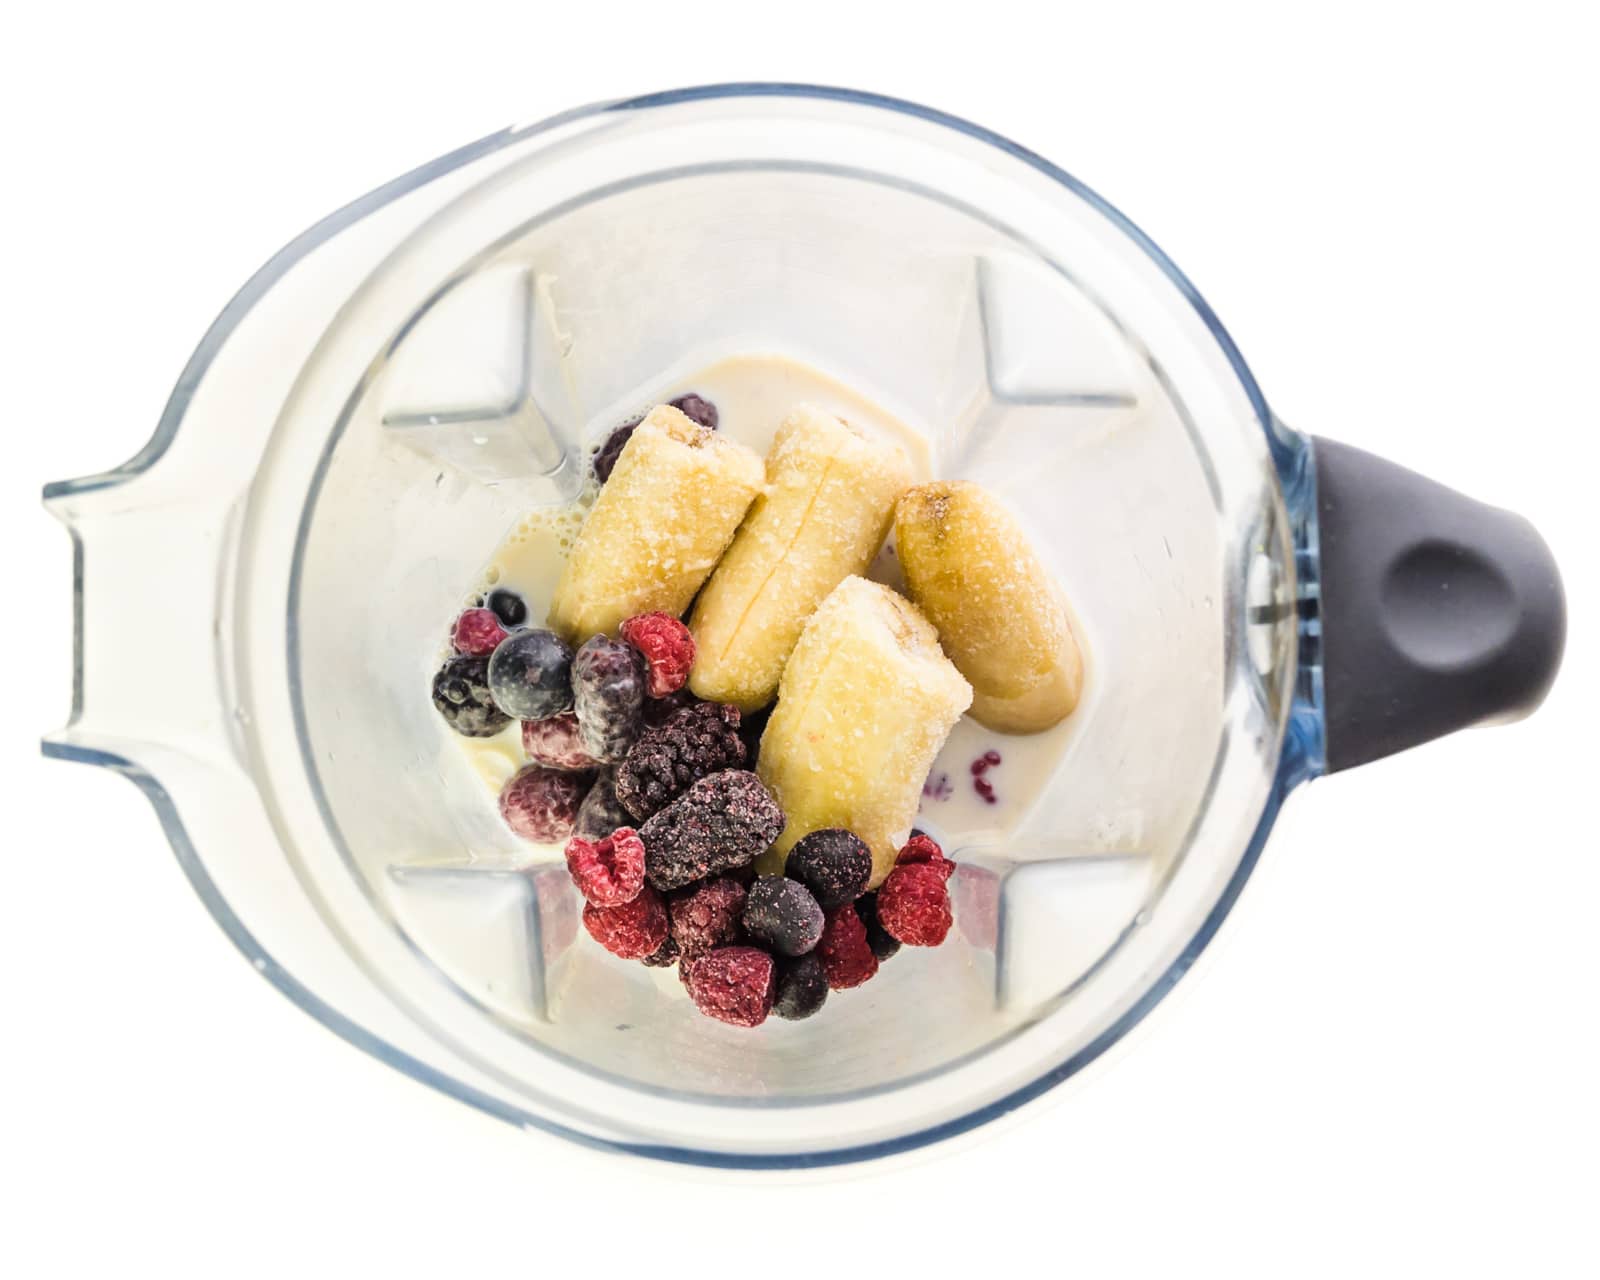 Ingredients for a smoothie, including berries, are in the bottom of a blender.